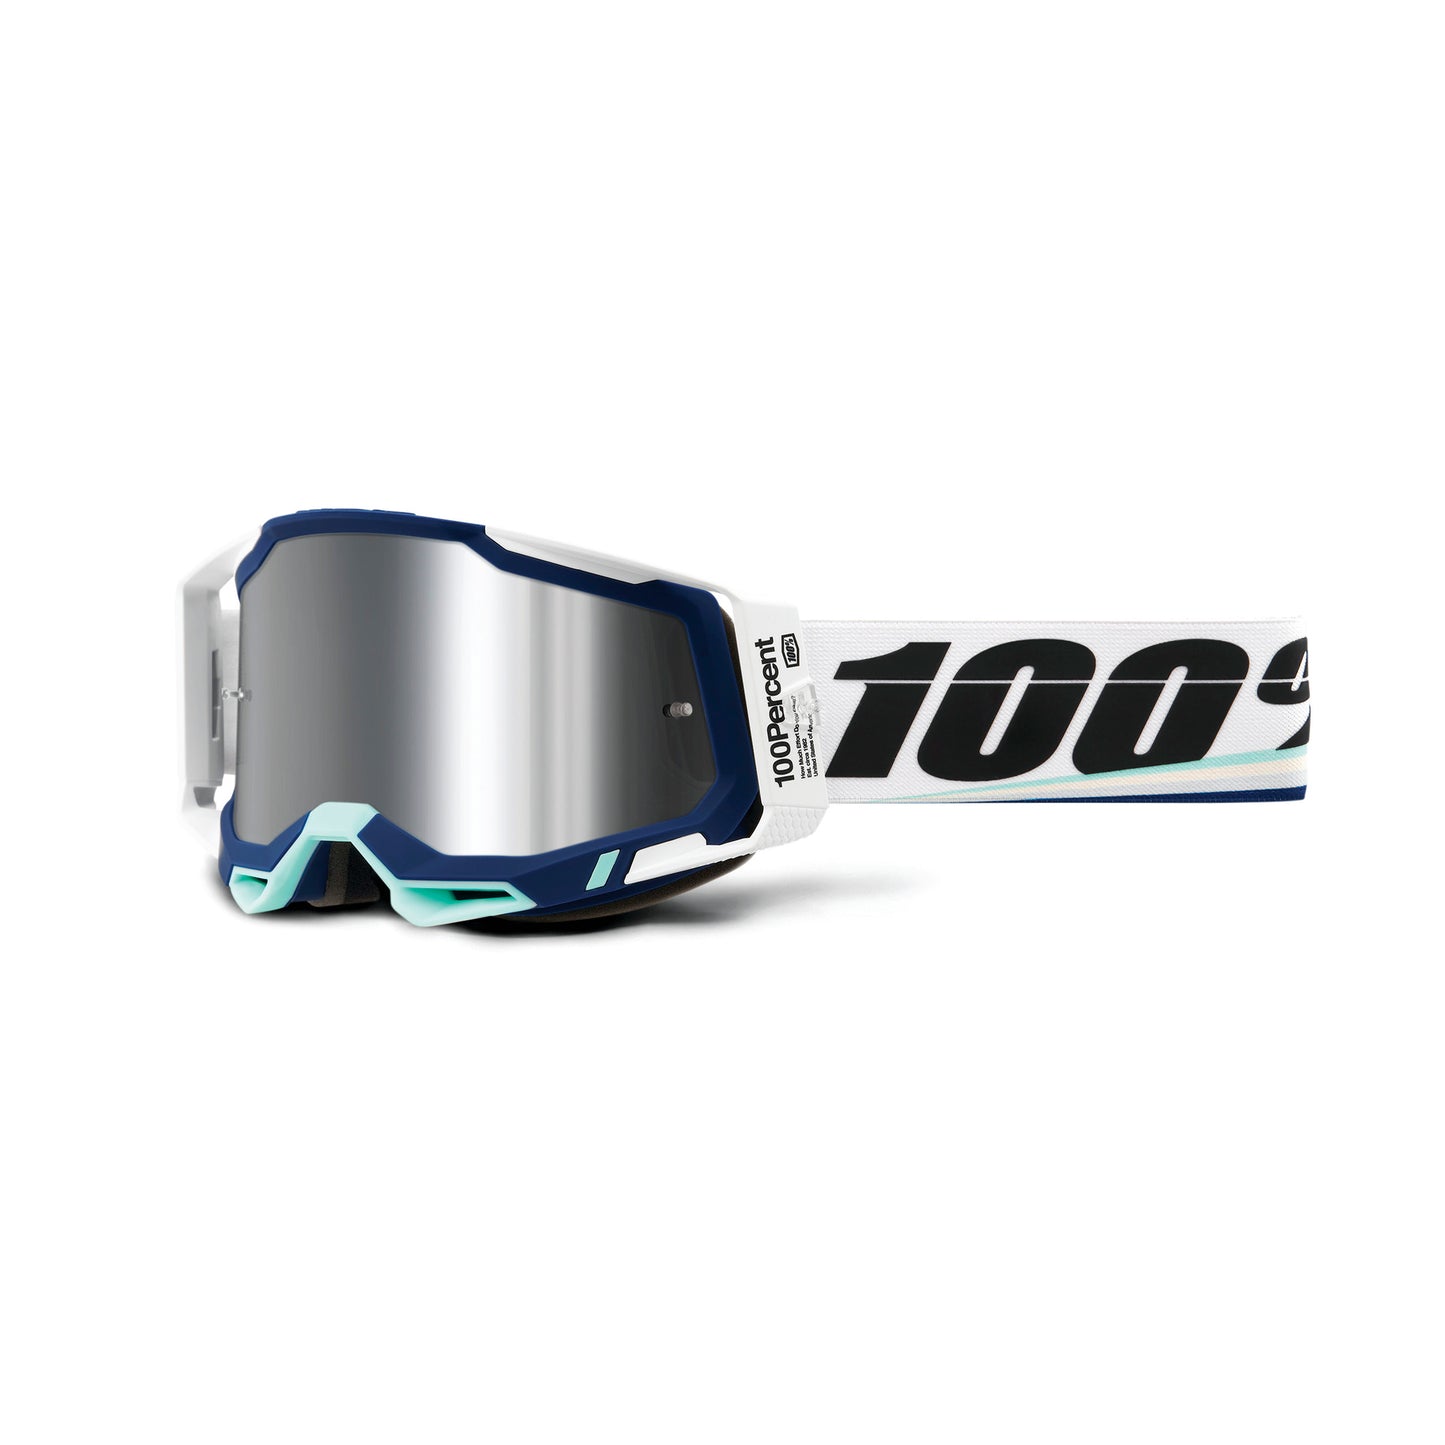 100 Percent Racecraft 2 Goggles - One Size Fits Most - Arsham - Flash Silver Mirror Lens